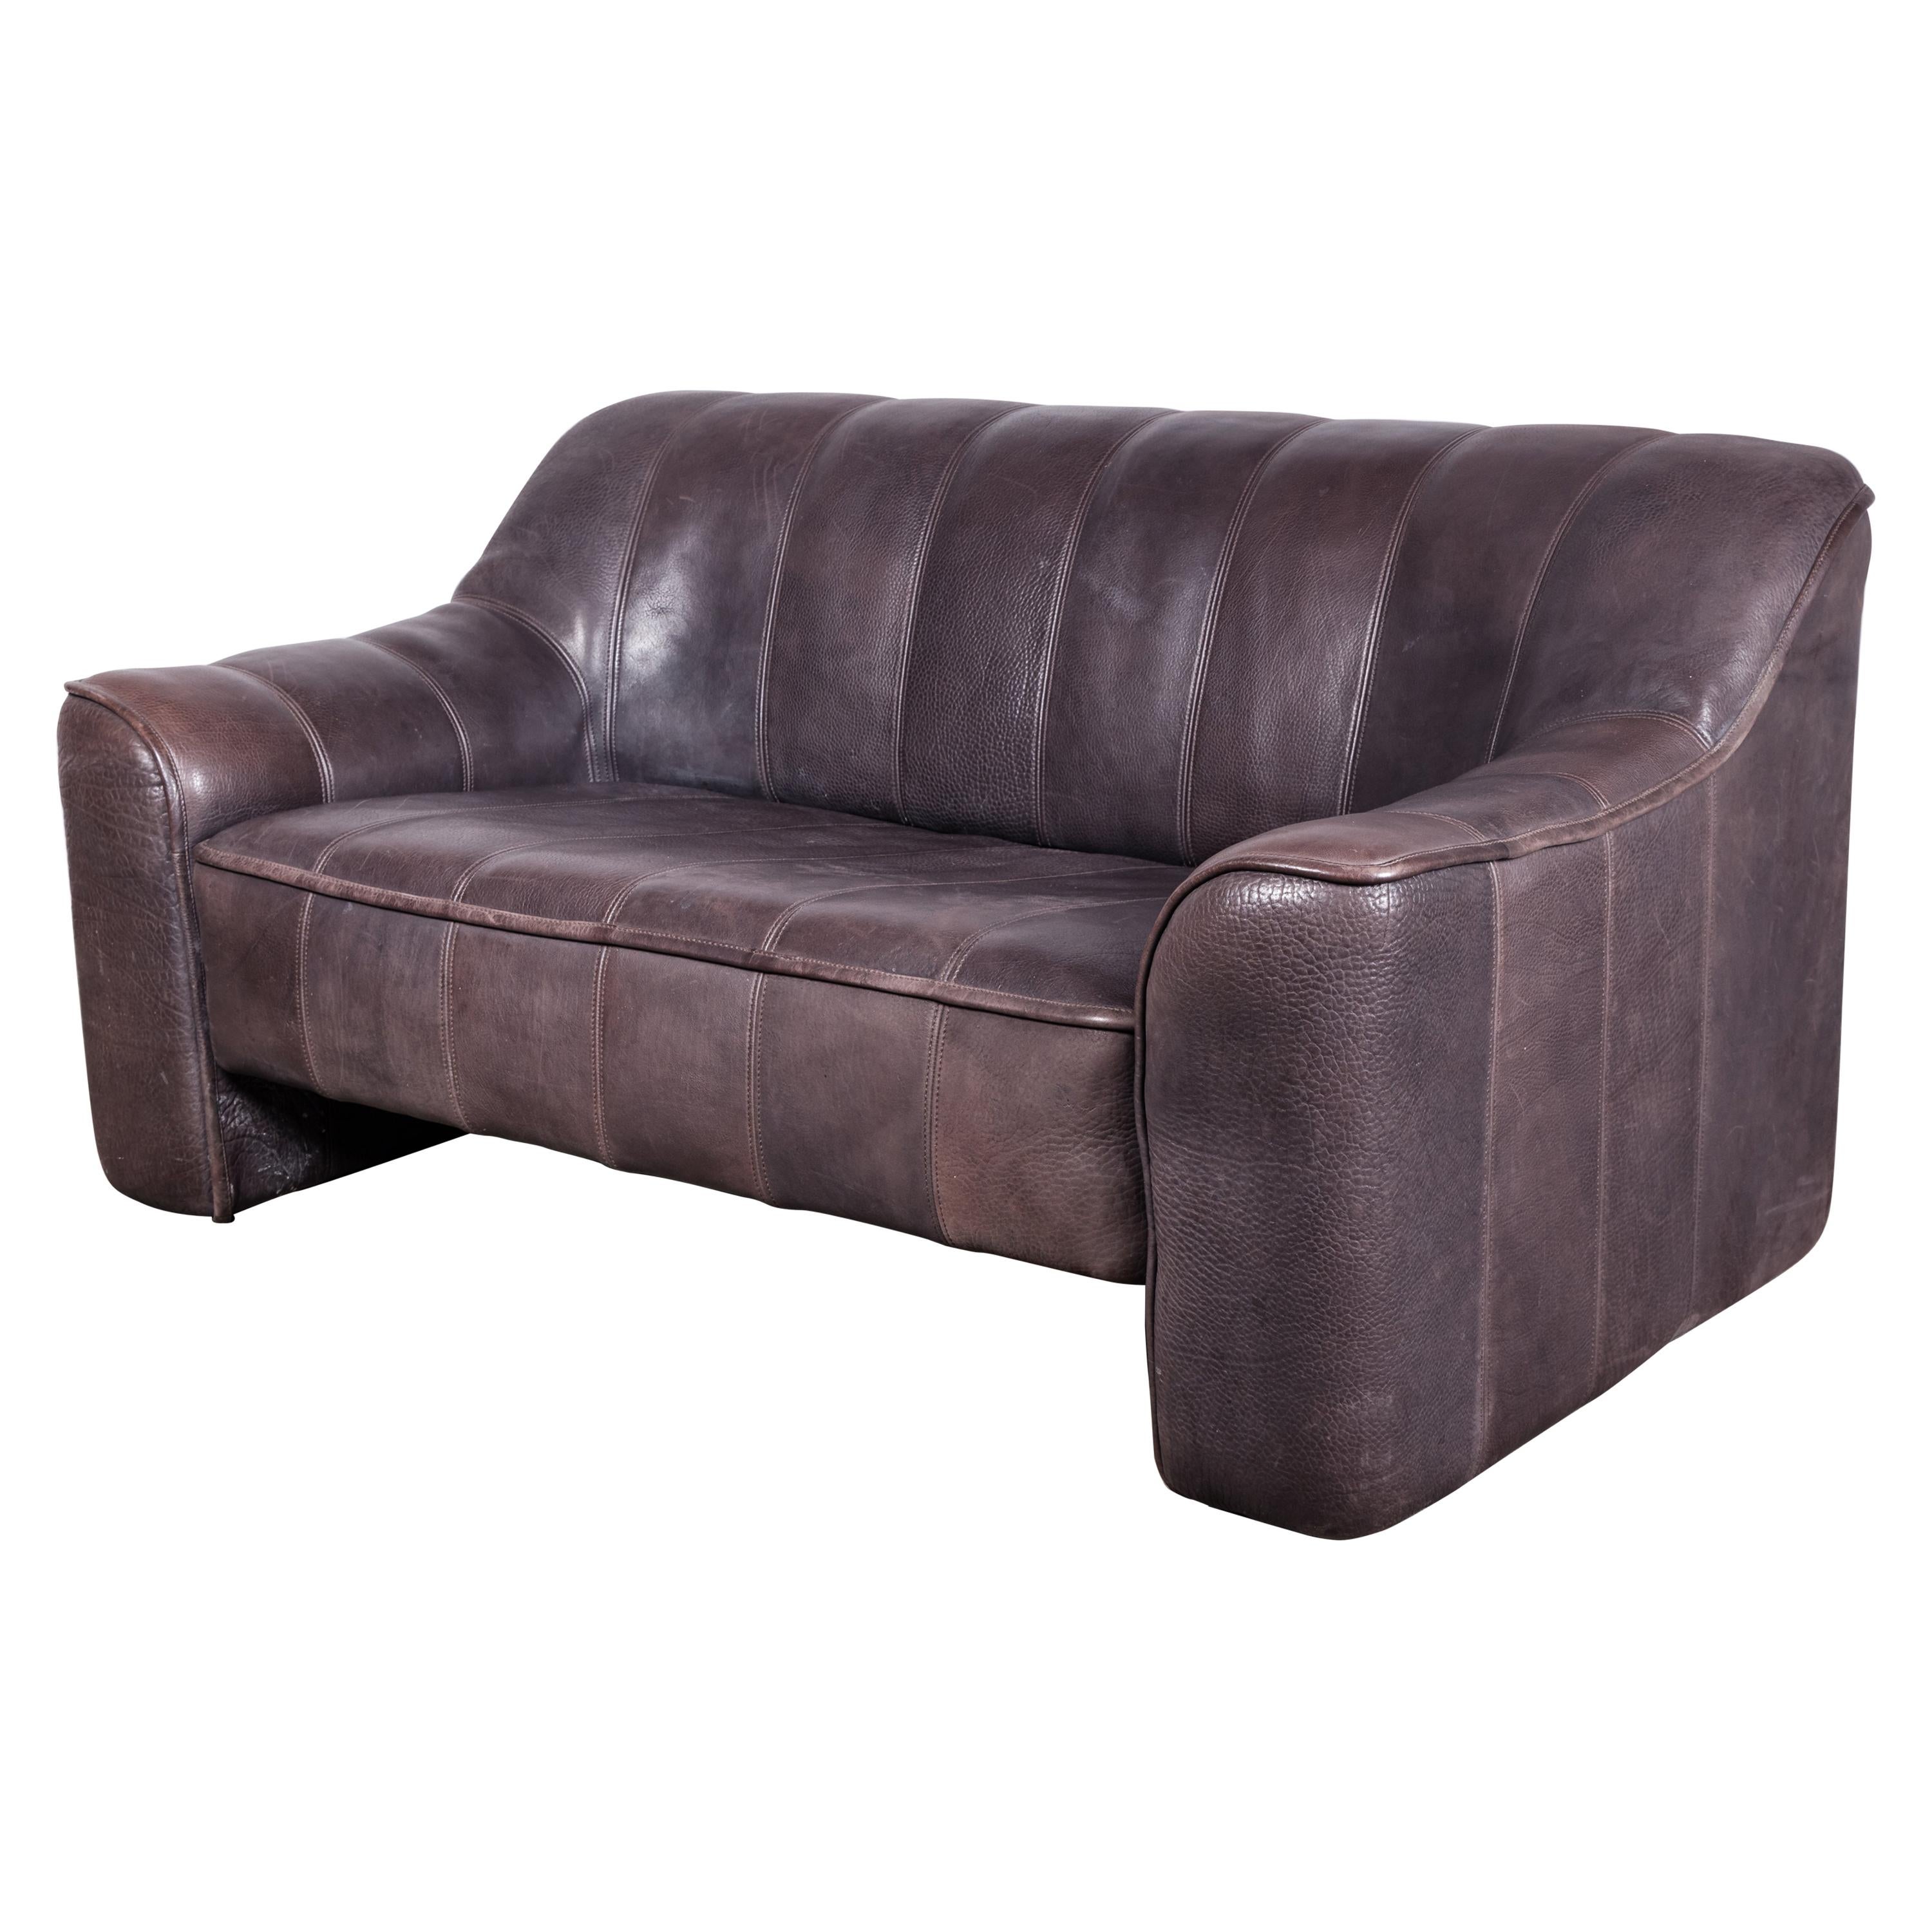 Thick and Soft Buffalo Leather De Sede DS-44 Loveseat Sofa